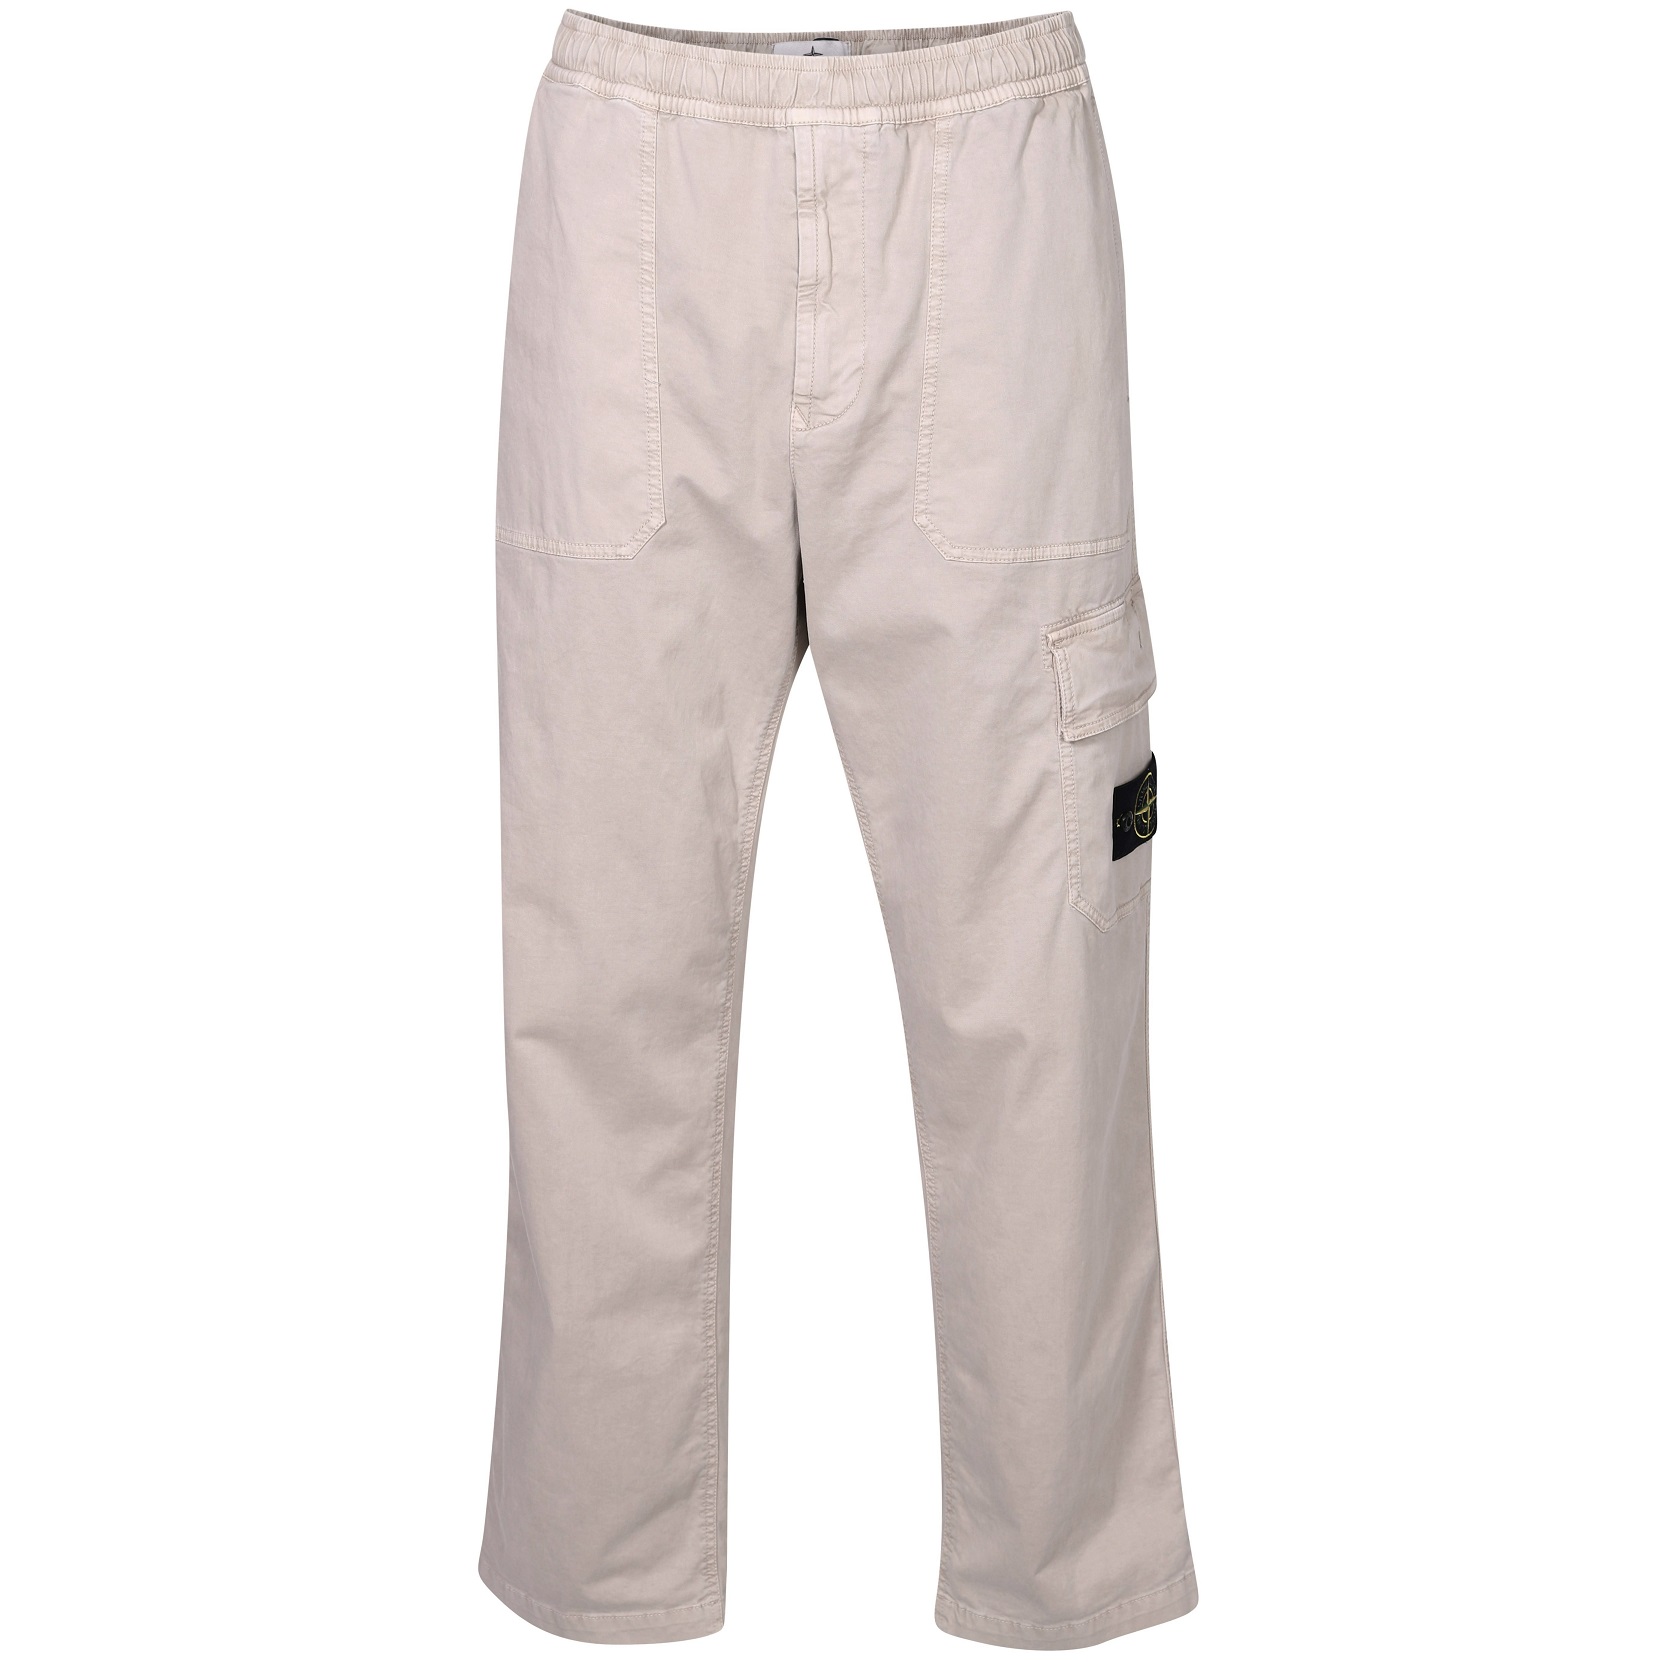 STONE ISLAND Loose Cargo Pant in Washed Dove Grey 34